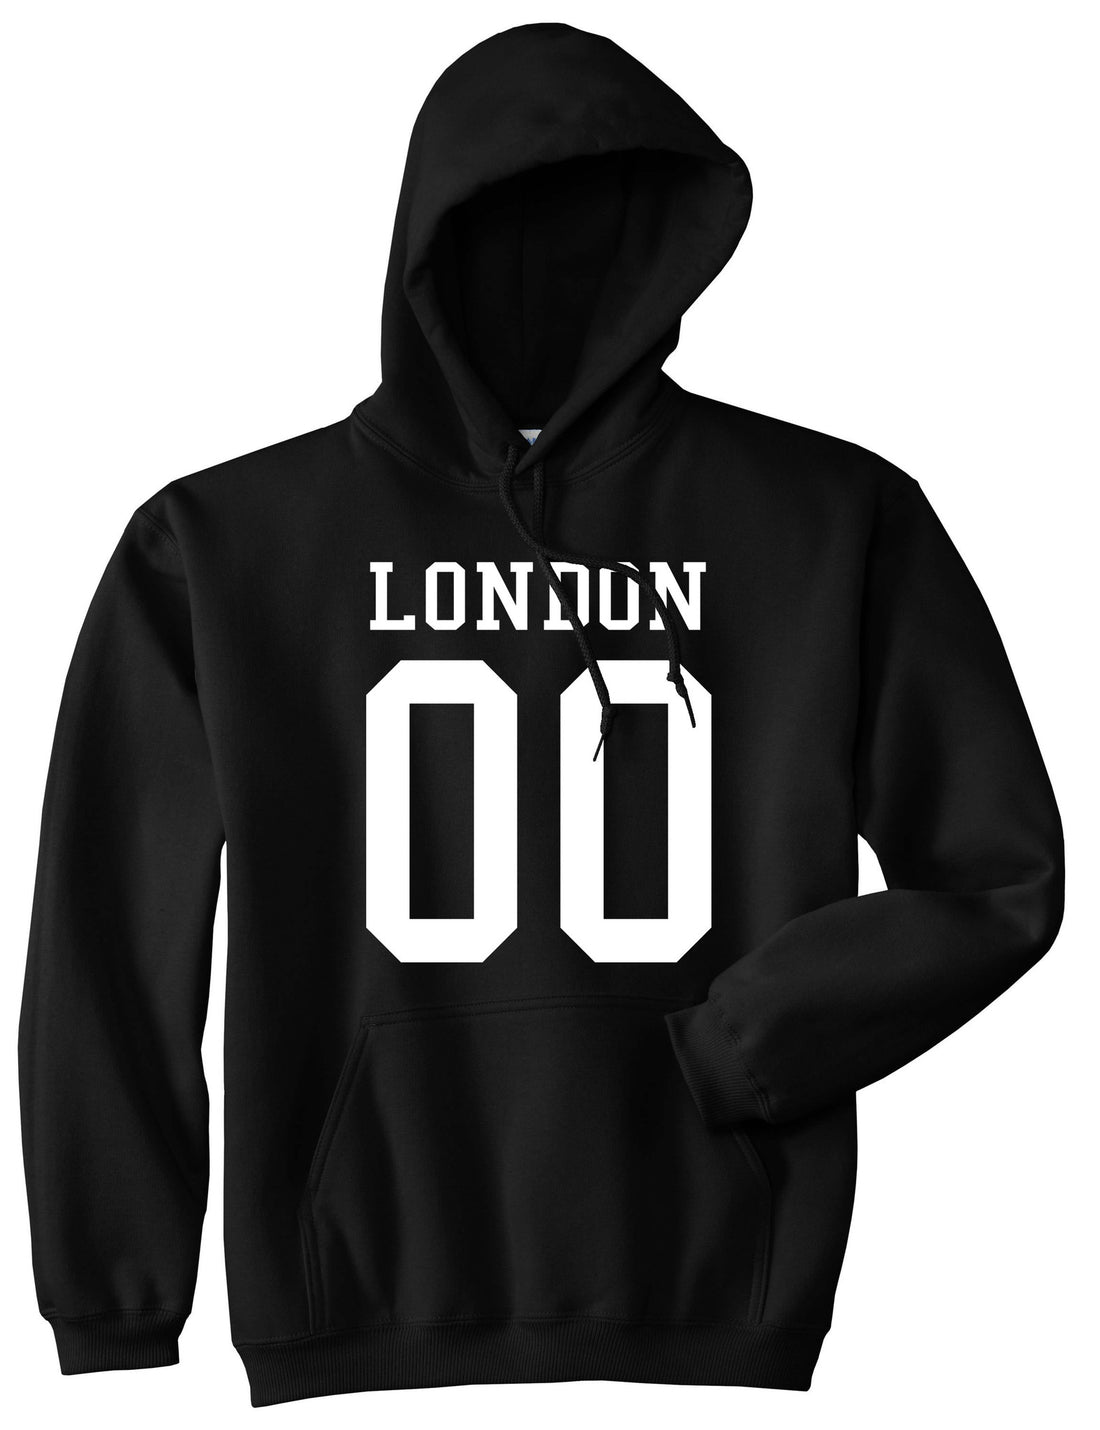 London Team 00 Jersey Pullover Hoodie in Black By Kings Of NY